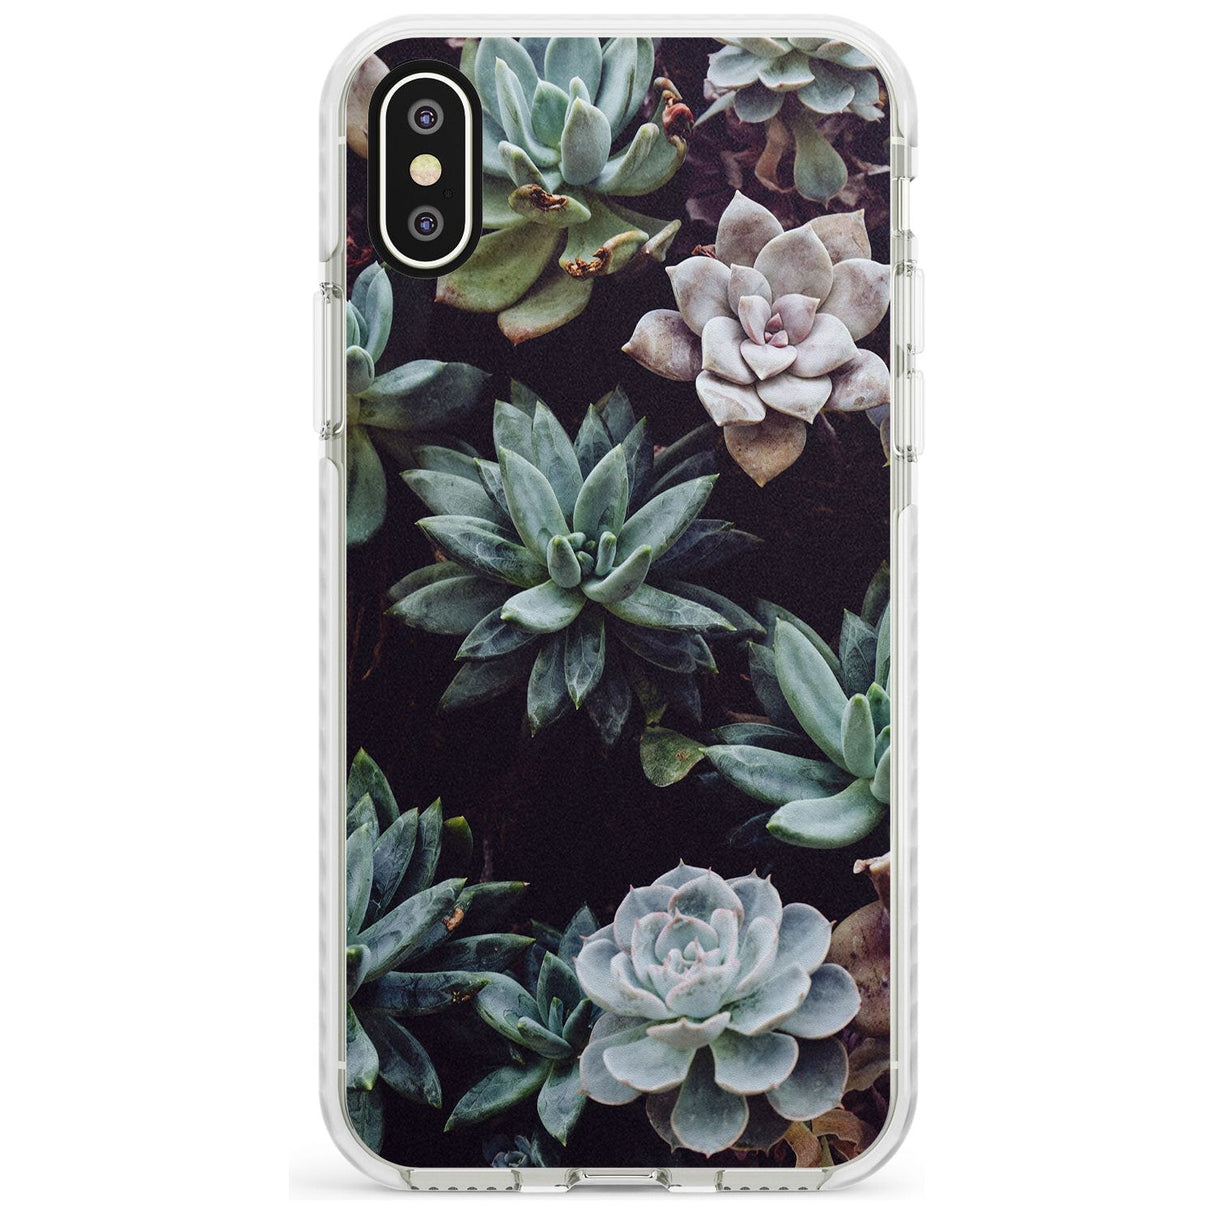 Mixed Succulents - Real Botanical Photographs Impact Phone Case for iPhone X XS Max XR